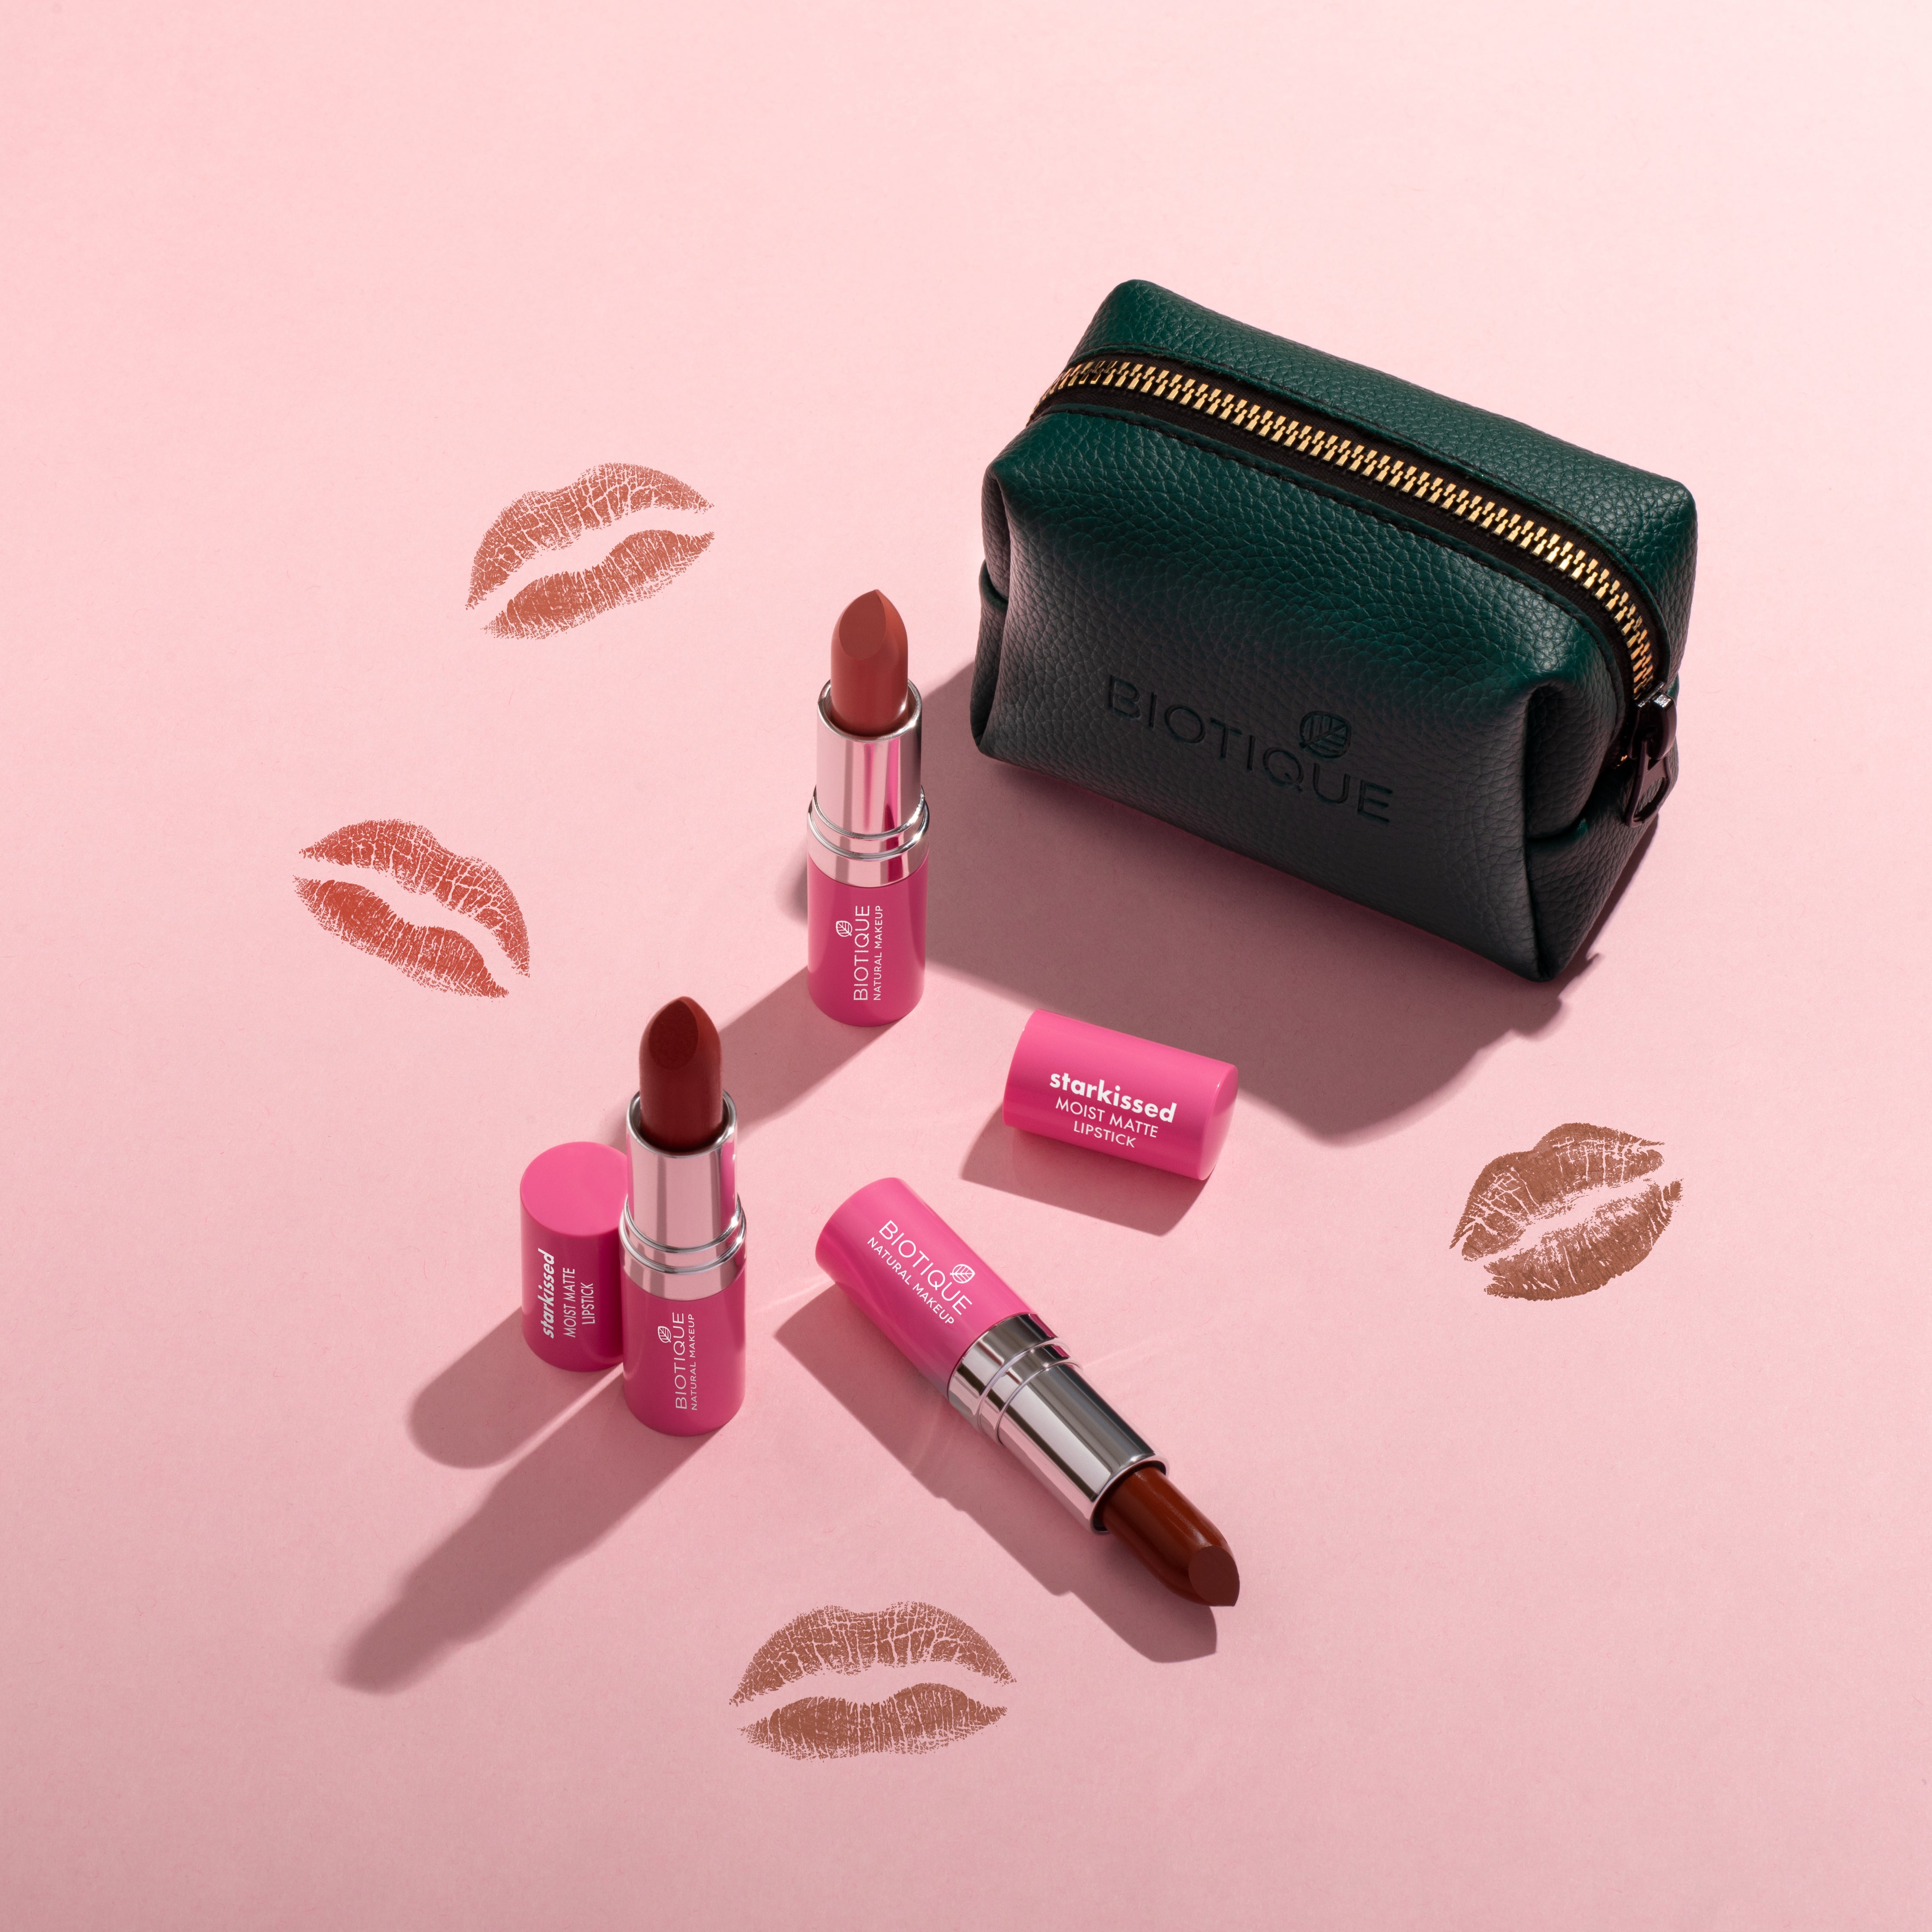 Lipstick Pack of 3: Nude Edition with Lipstick Case